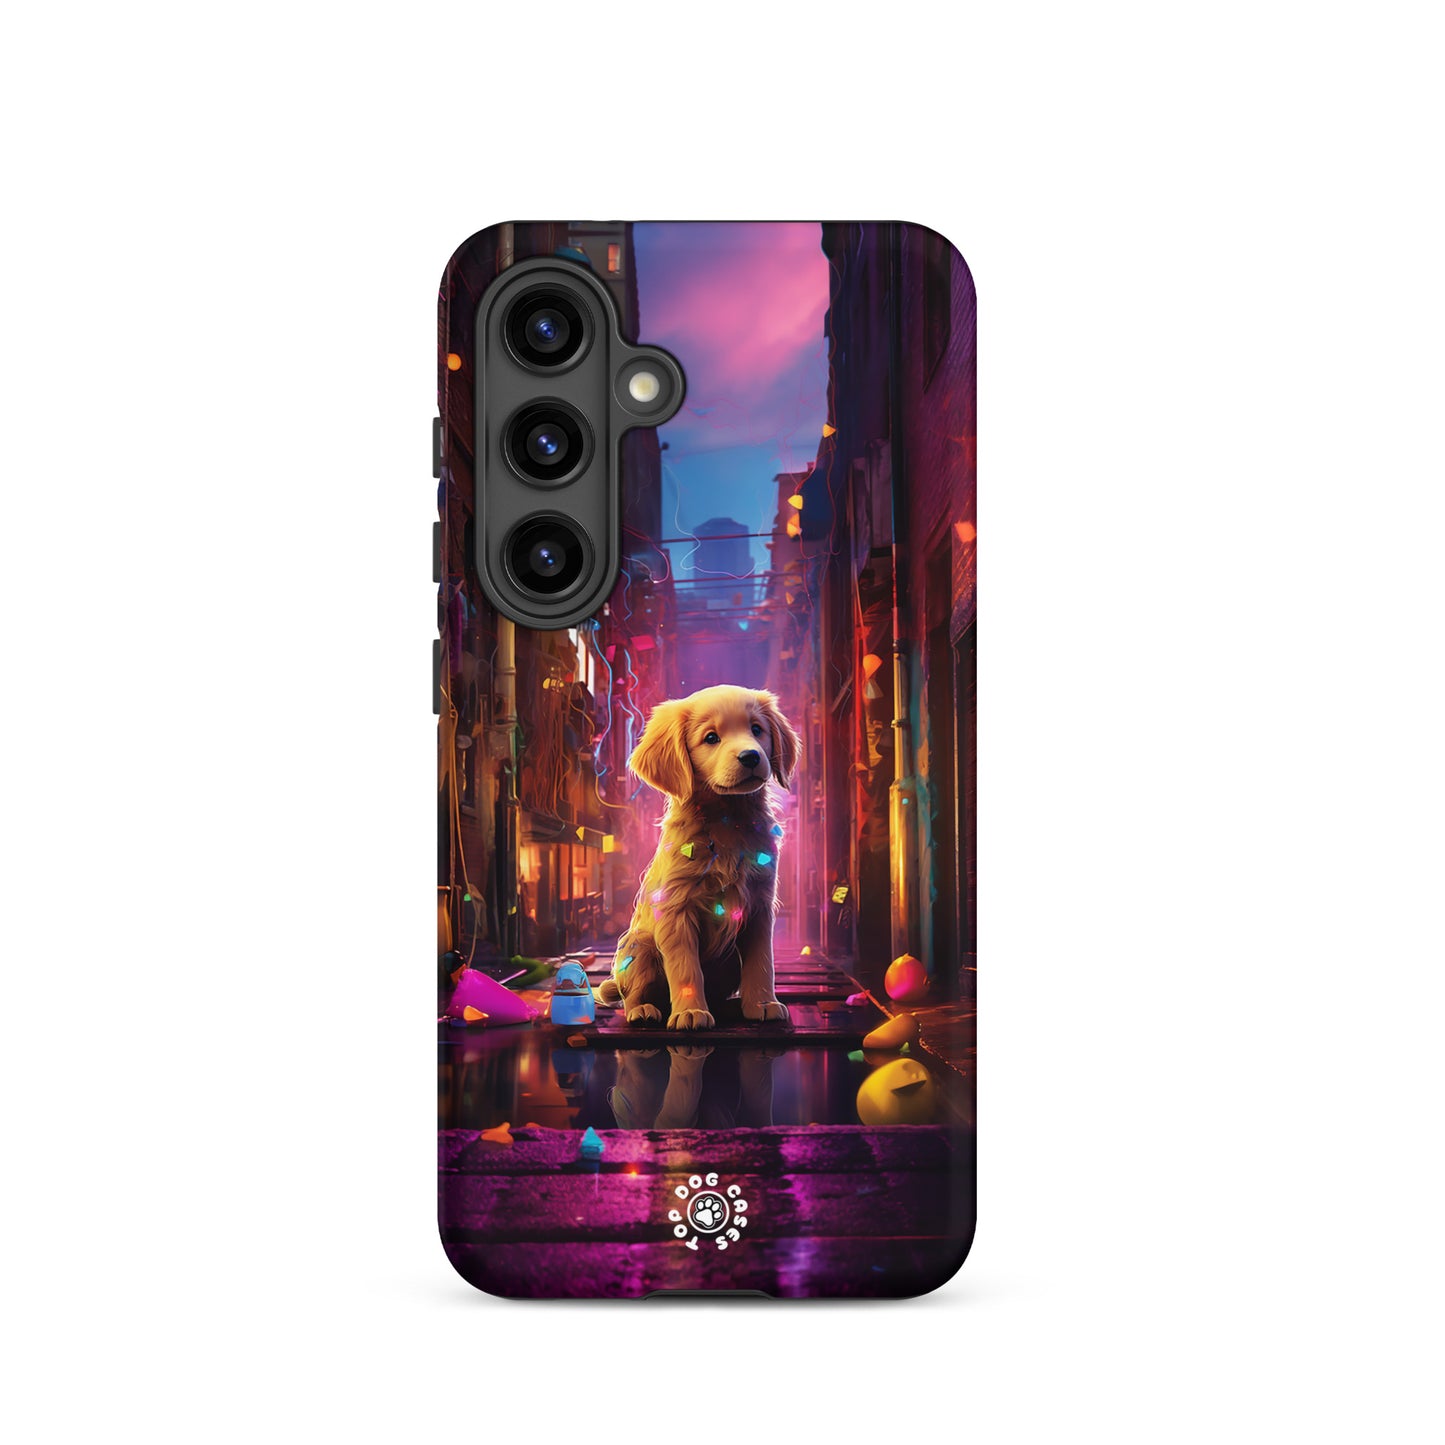 Golden Retriever in the City - Samsung Phone Case - Cute Phone Cases - Top Dog Cases - #CyberpunkCityDog, #GoldenRetriever, #SamsungGalaxyCase, #SamsungGalaxyS20, #SamsungGalaxyS21, #SamsungGalaxyS22, #SamsungGalaxyS22Ultra, #SamsungGalaxyS23, #SamsungGalaxyS23Ultra